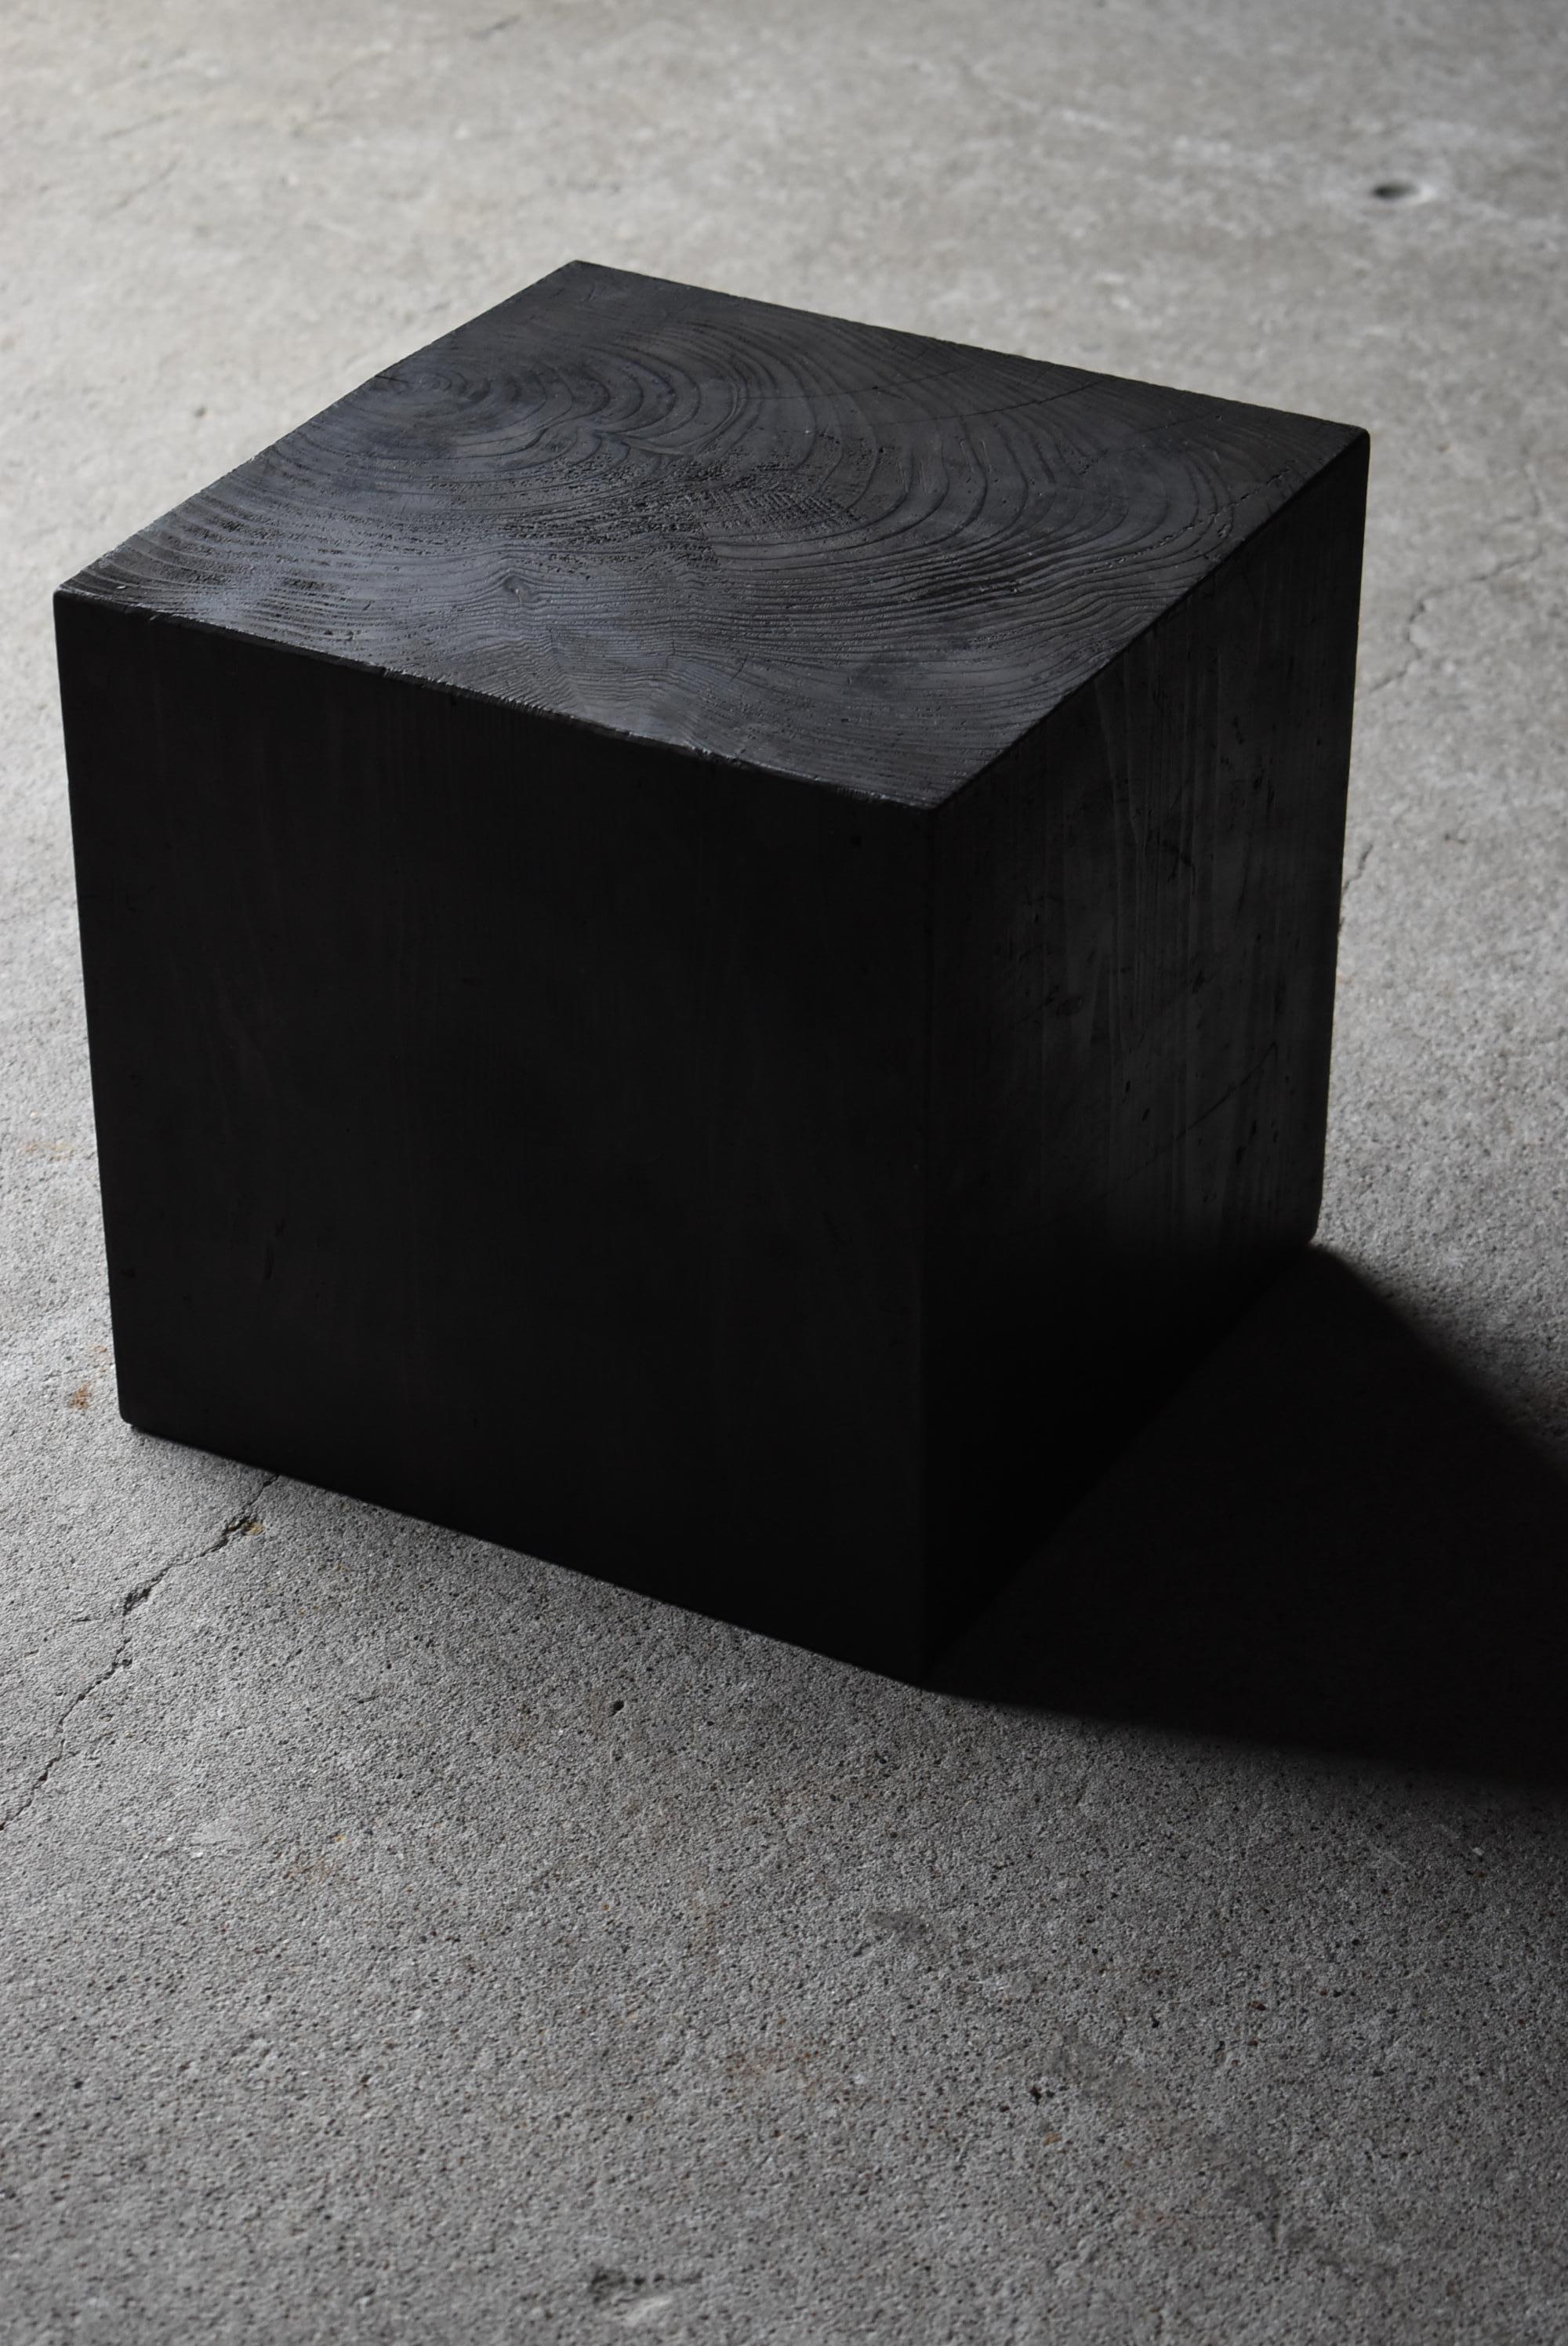 Old Japanese black wooden block stool.
It is from the mid-Showa period (1940s-1960s).
Material is pine wood.

Carved from a single pine tree.
Dynamic and massive.
Sturdy and stable.

Black lacquer is applied and the texture is beautiful.

It is